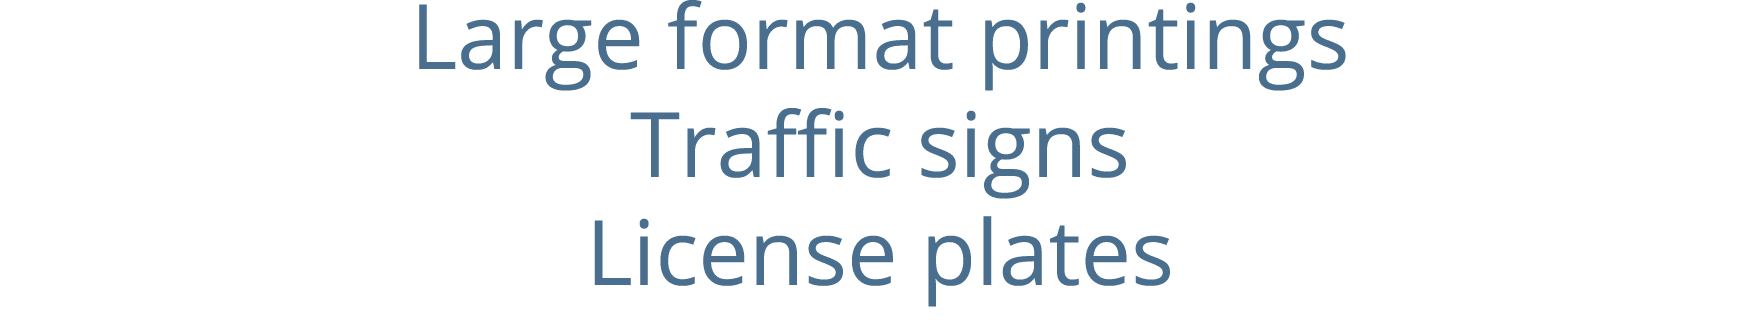 Large format printings Traffic signs License plates 